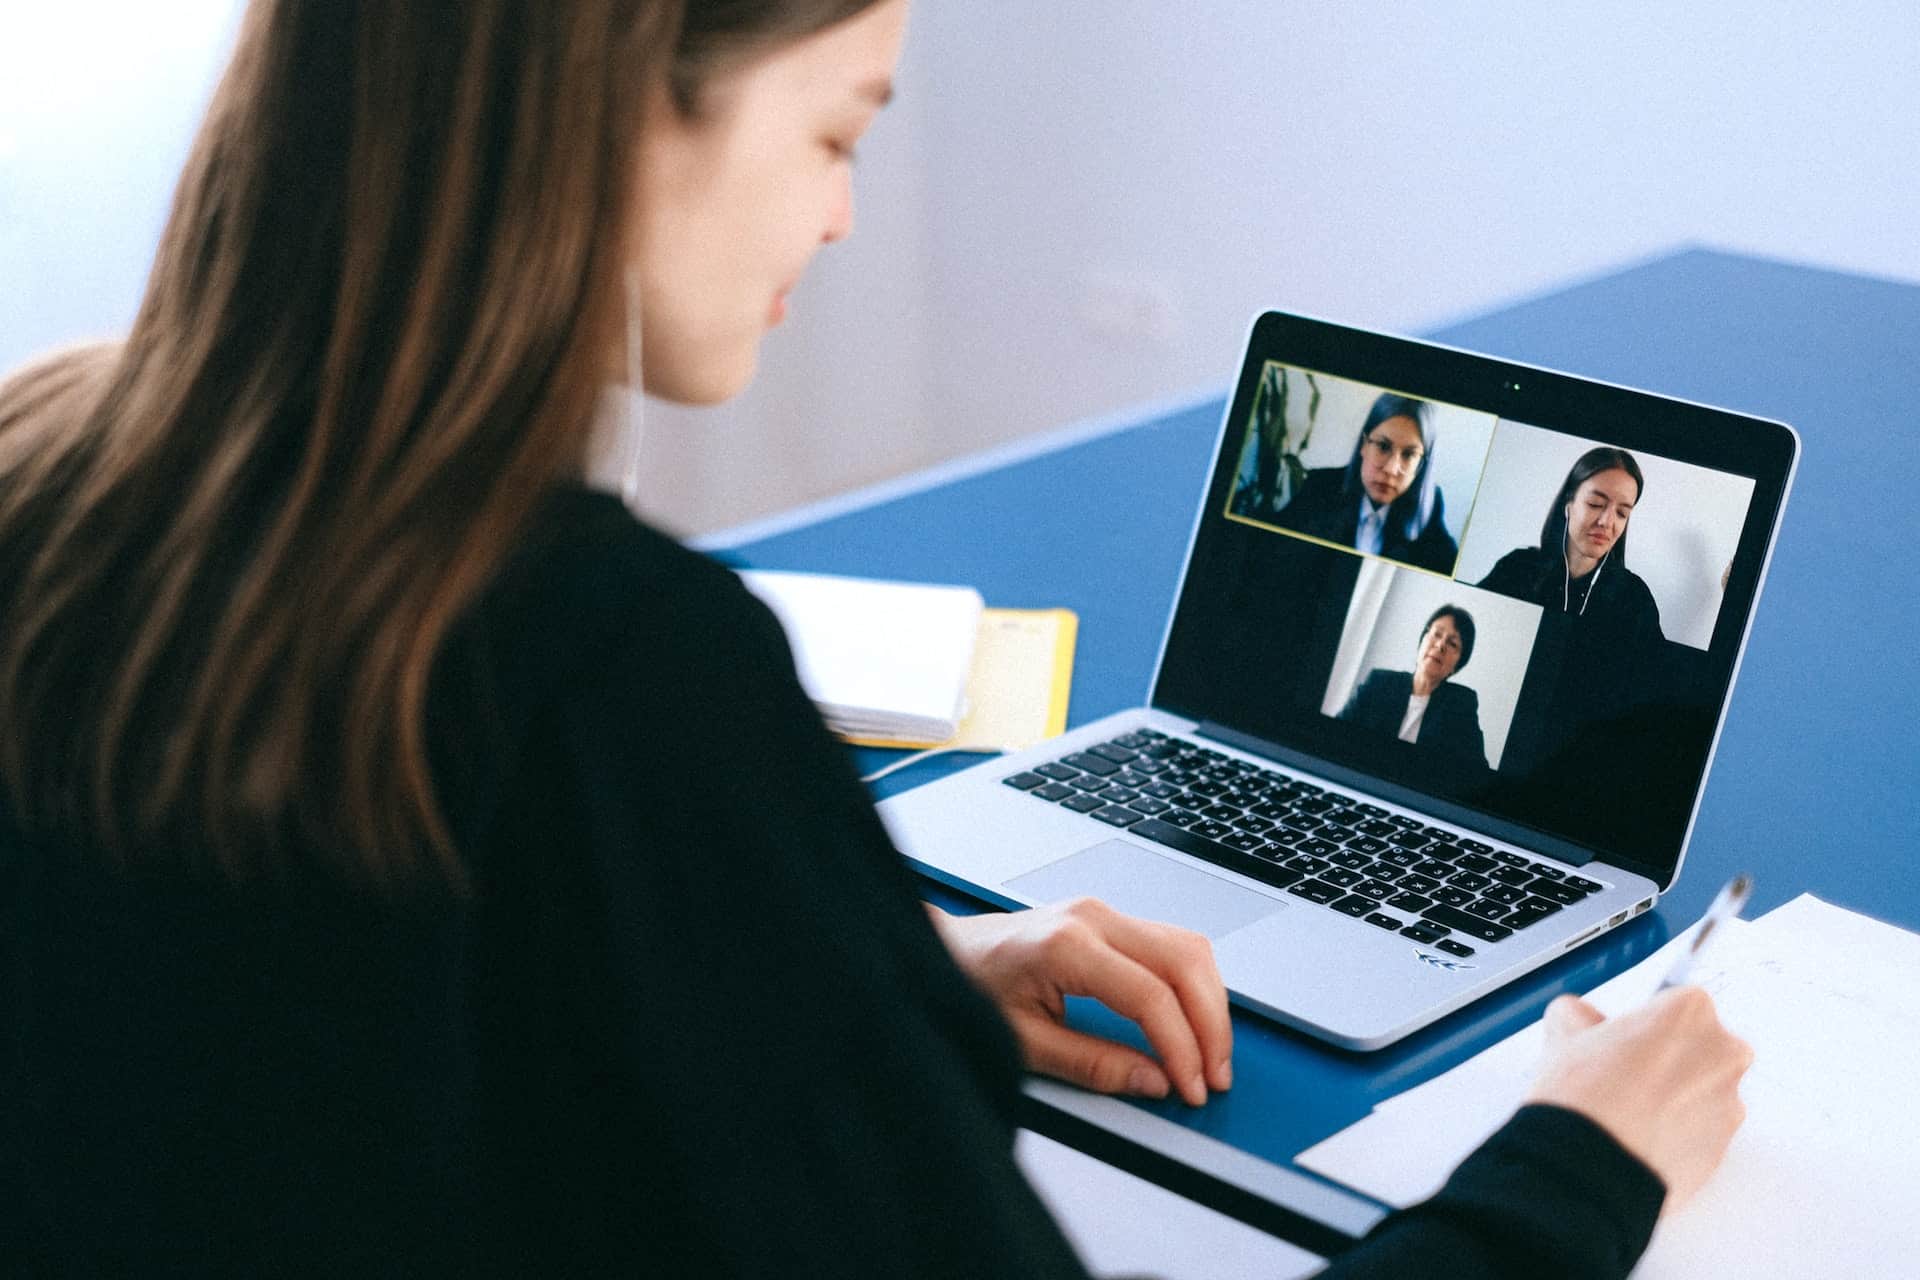 Woman on a video call with three other women